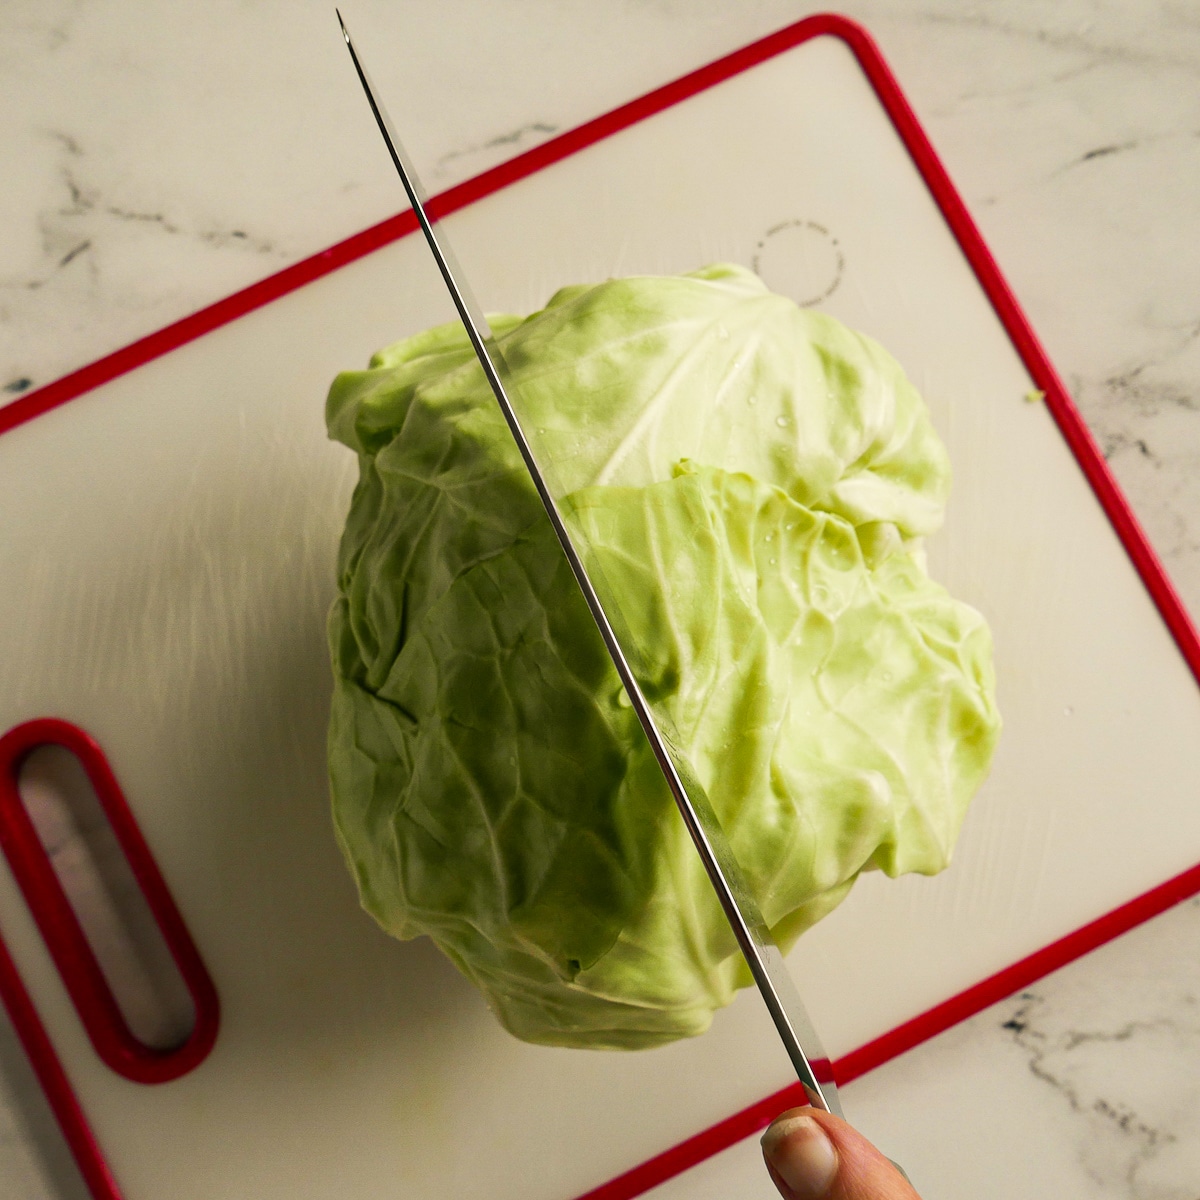 Knife slicing a green cabbage in half on a cutting board.